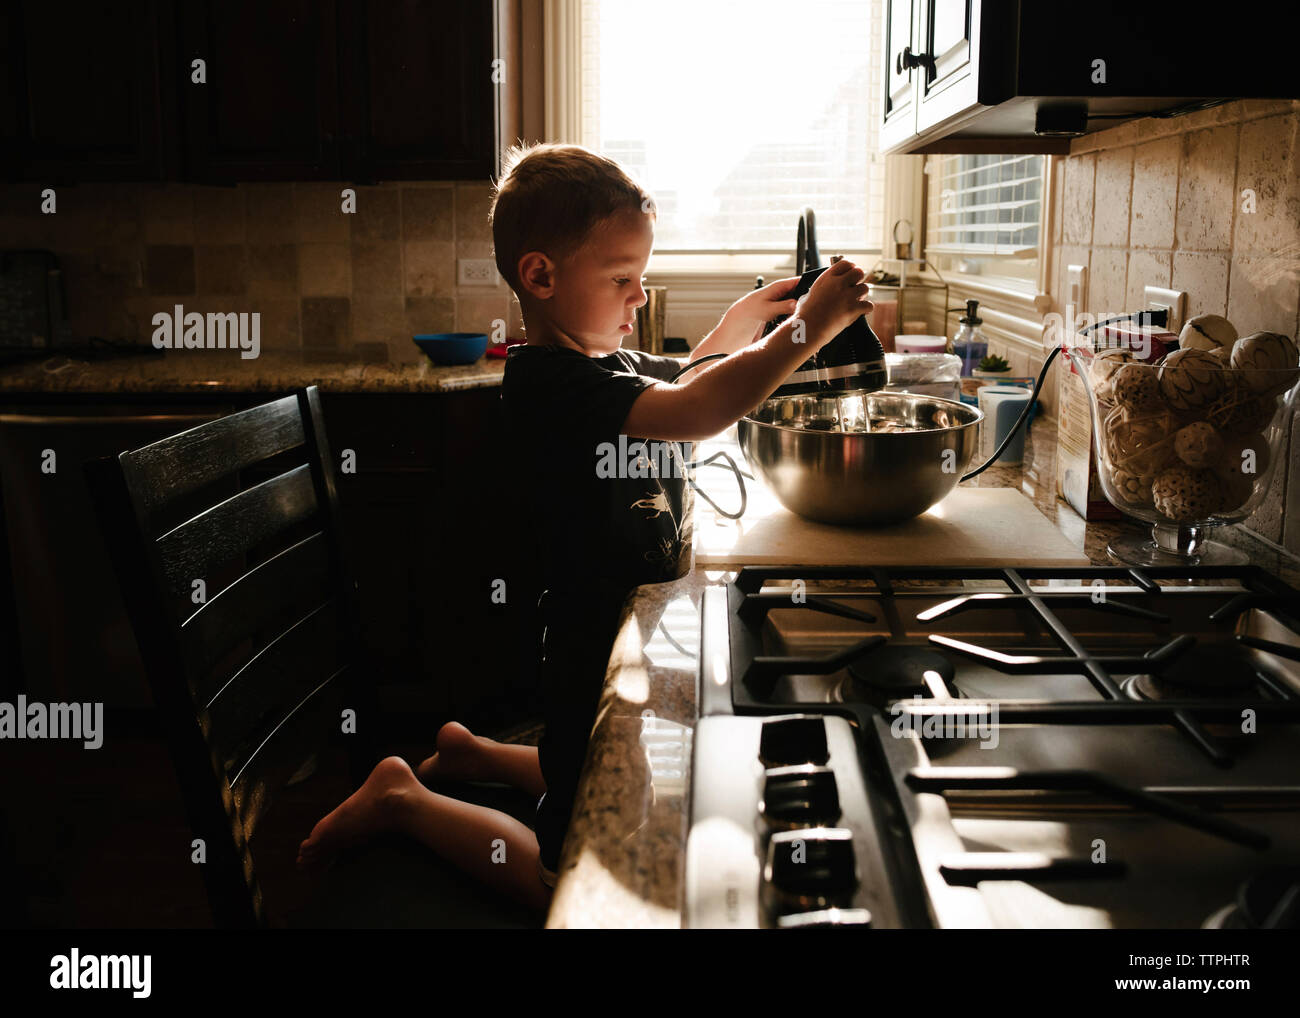 Side view of boy preparing food in kitchen at home Stock Photo